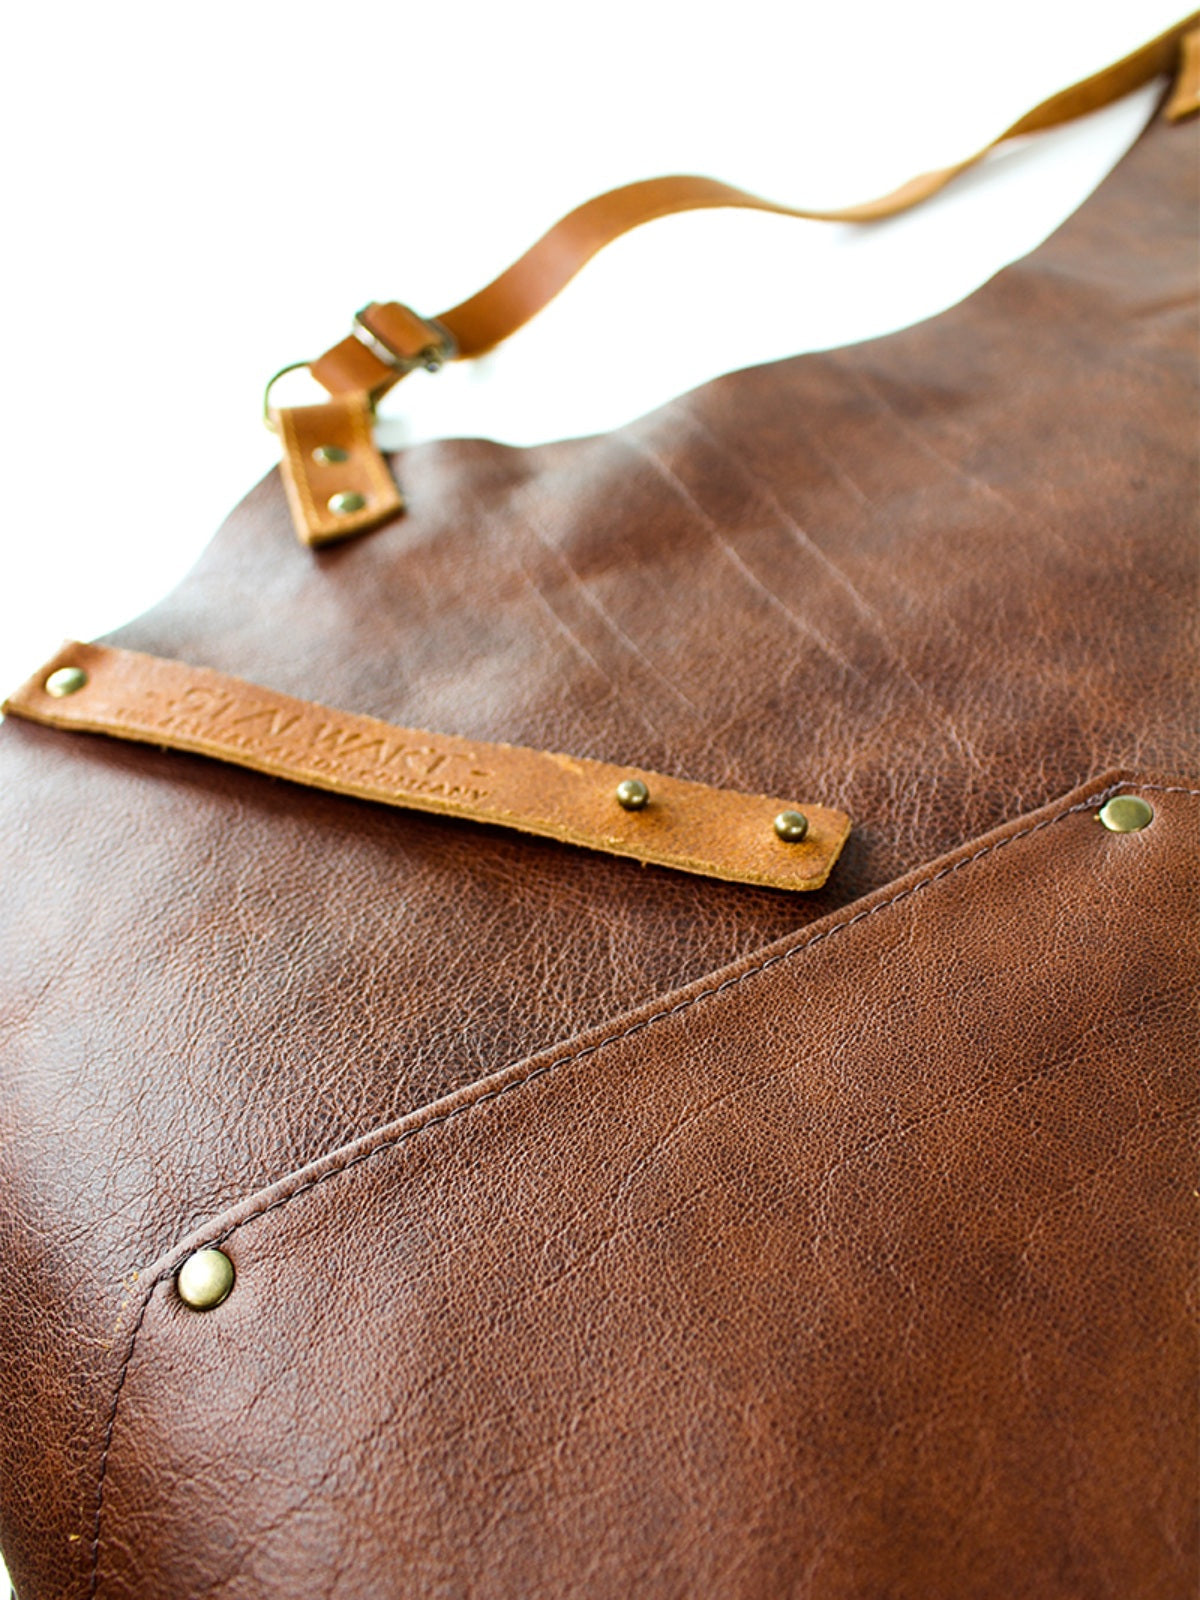 Leather Apron Cross Strap Deluxe Brown by Stalwart -  ChefsCotton